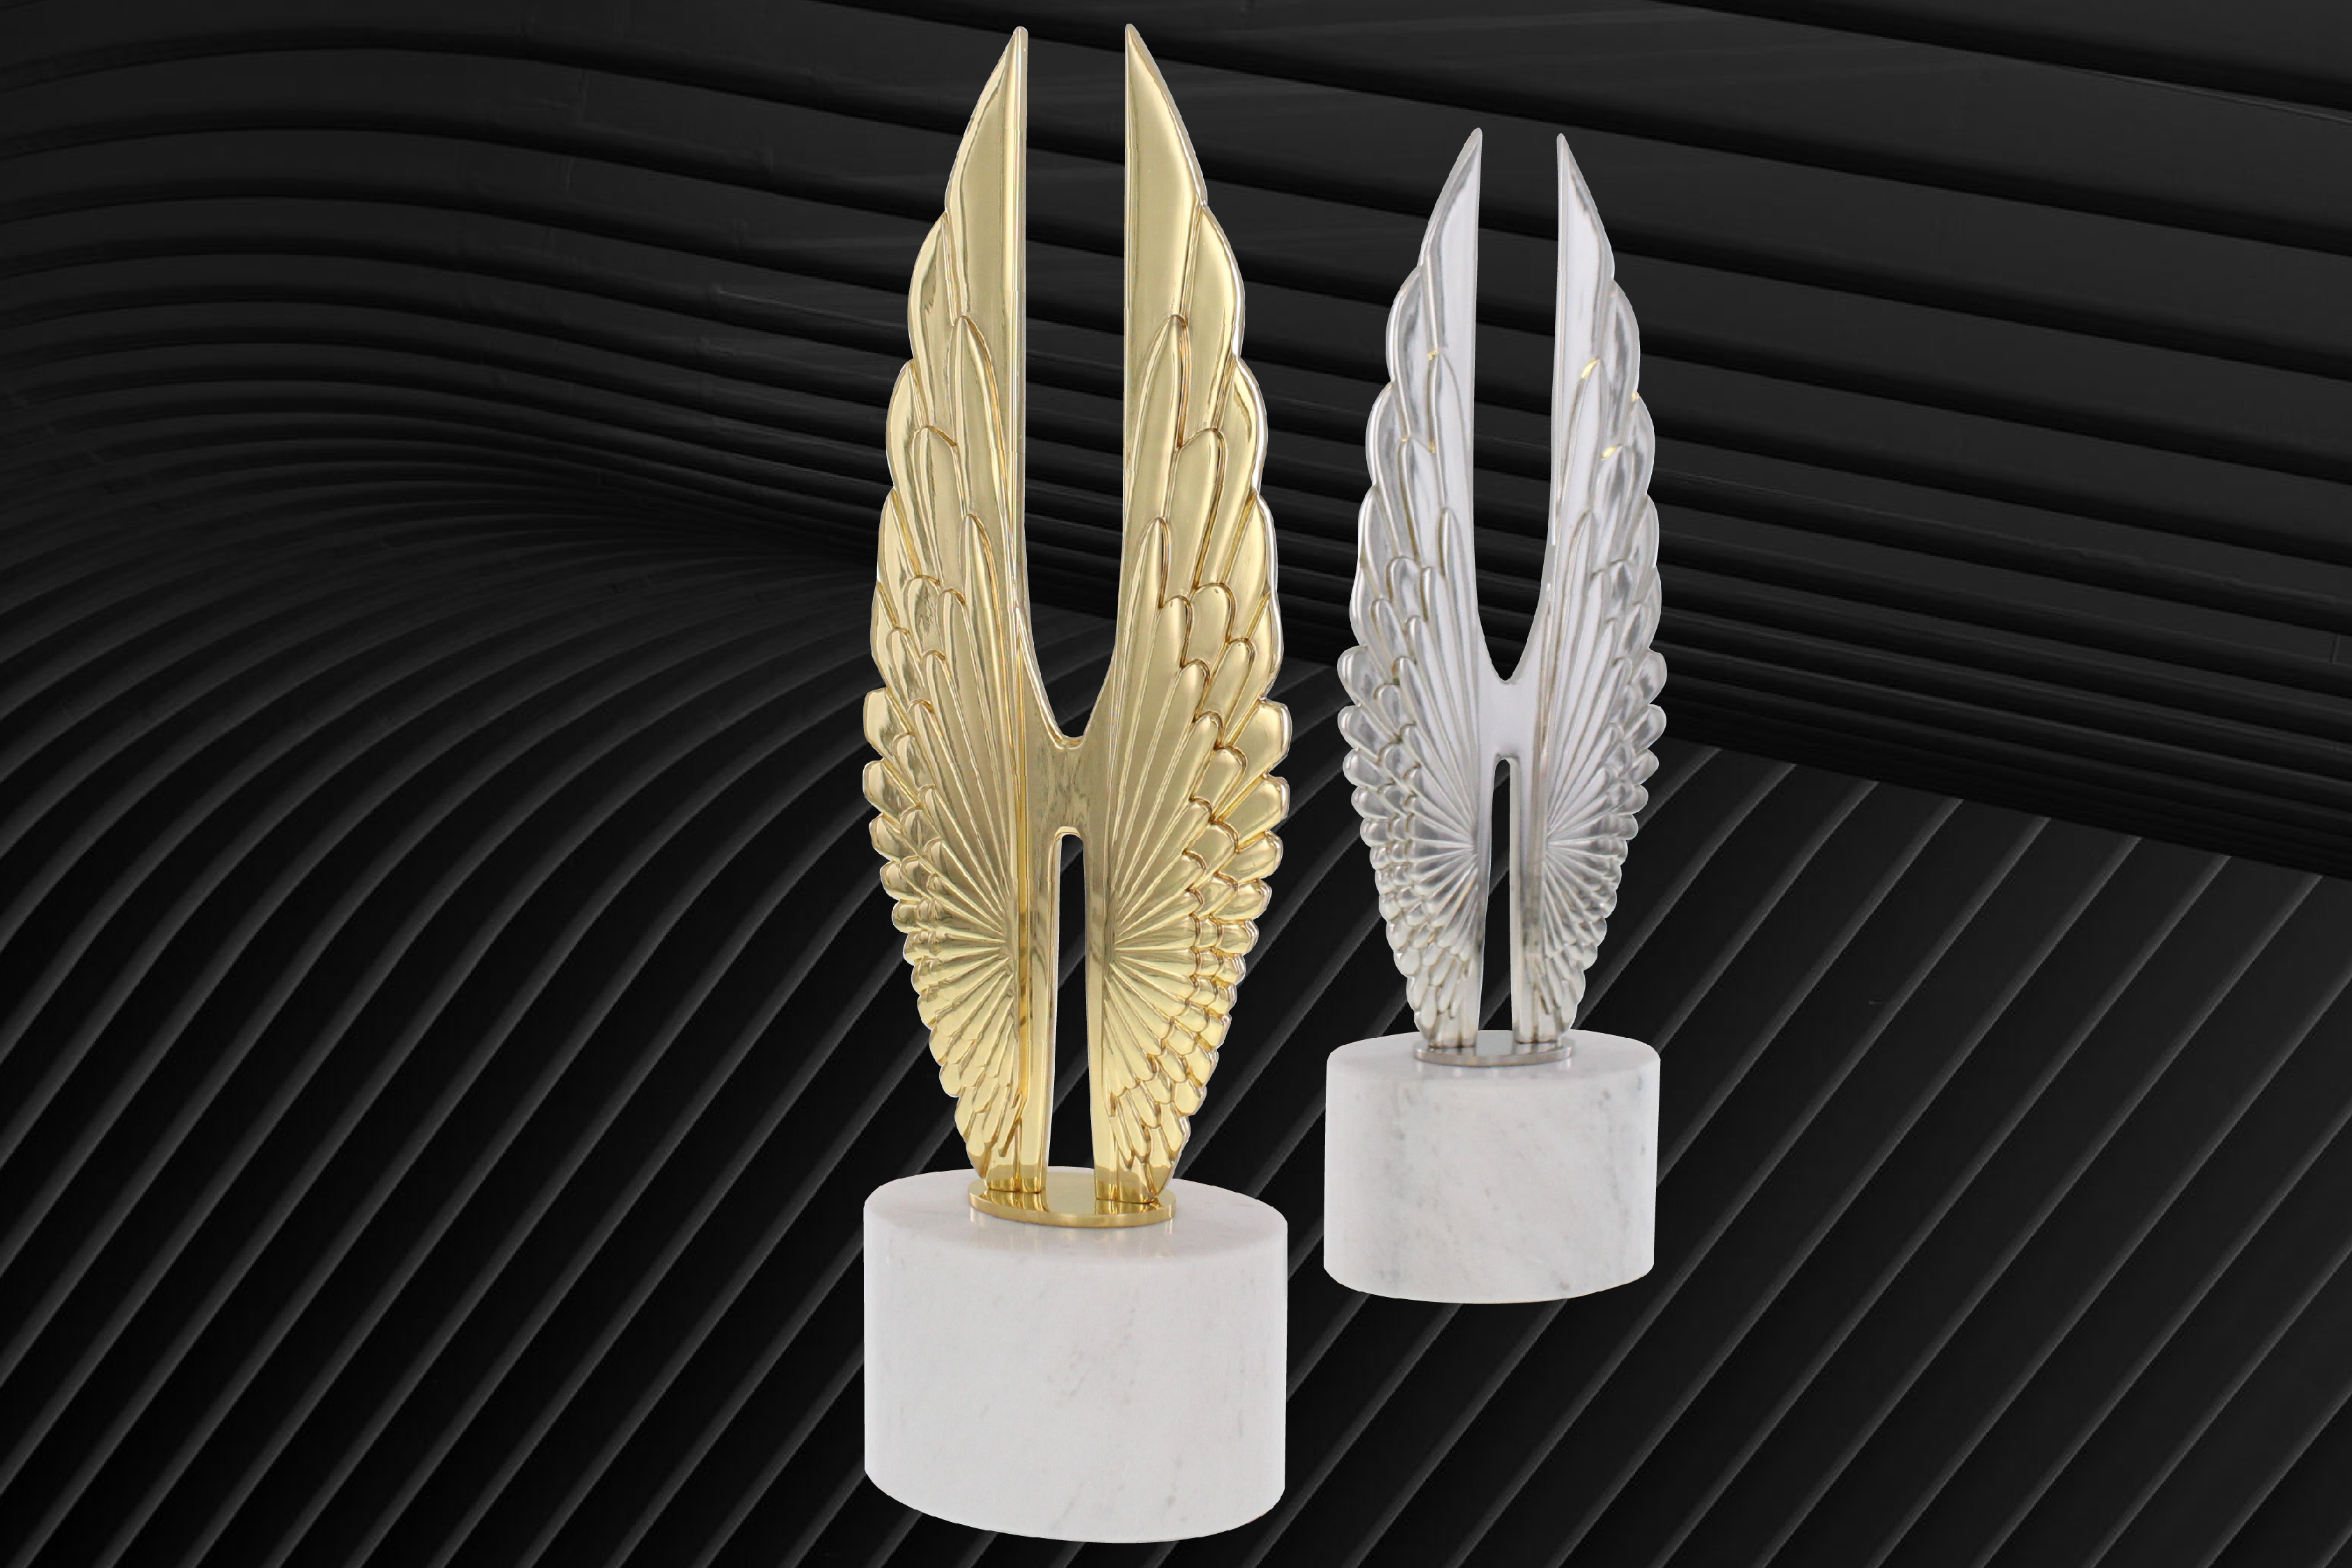 Newly redesigned Hermes Creative Awards trophy designed by Society Awards